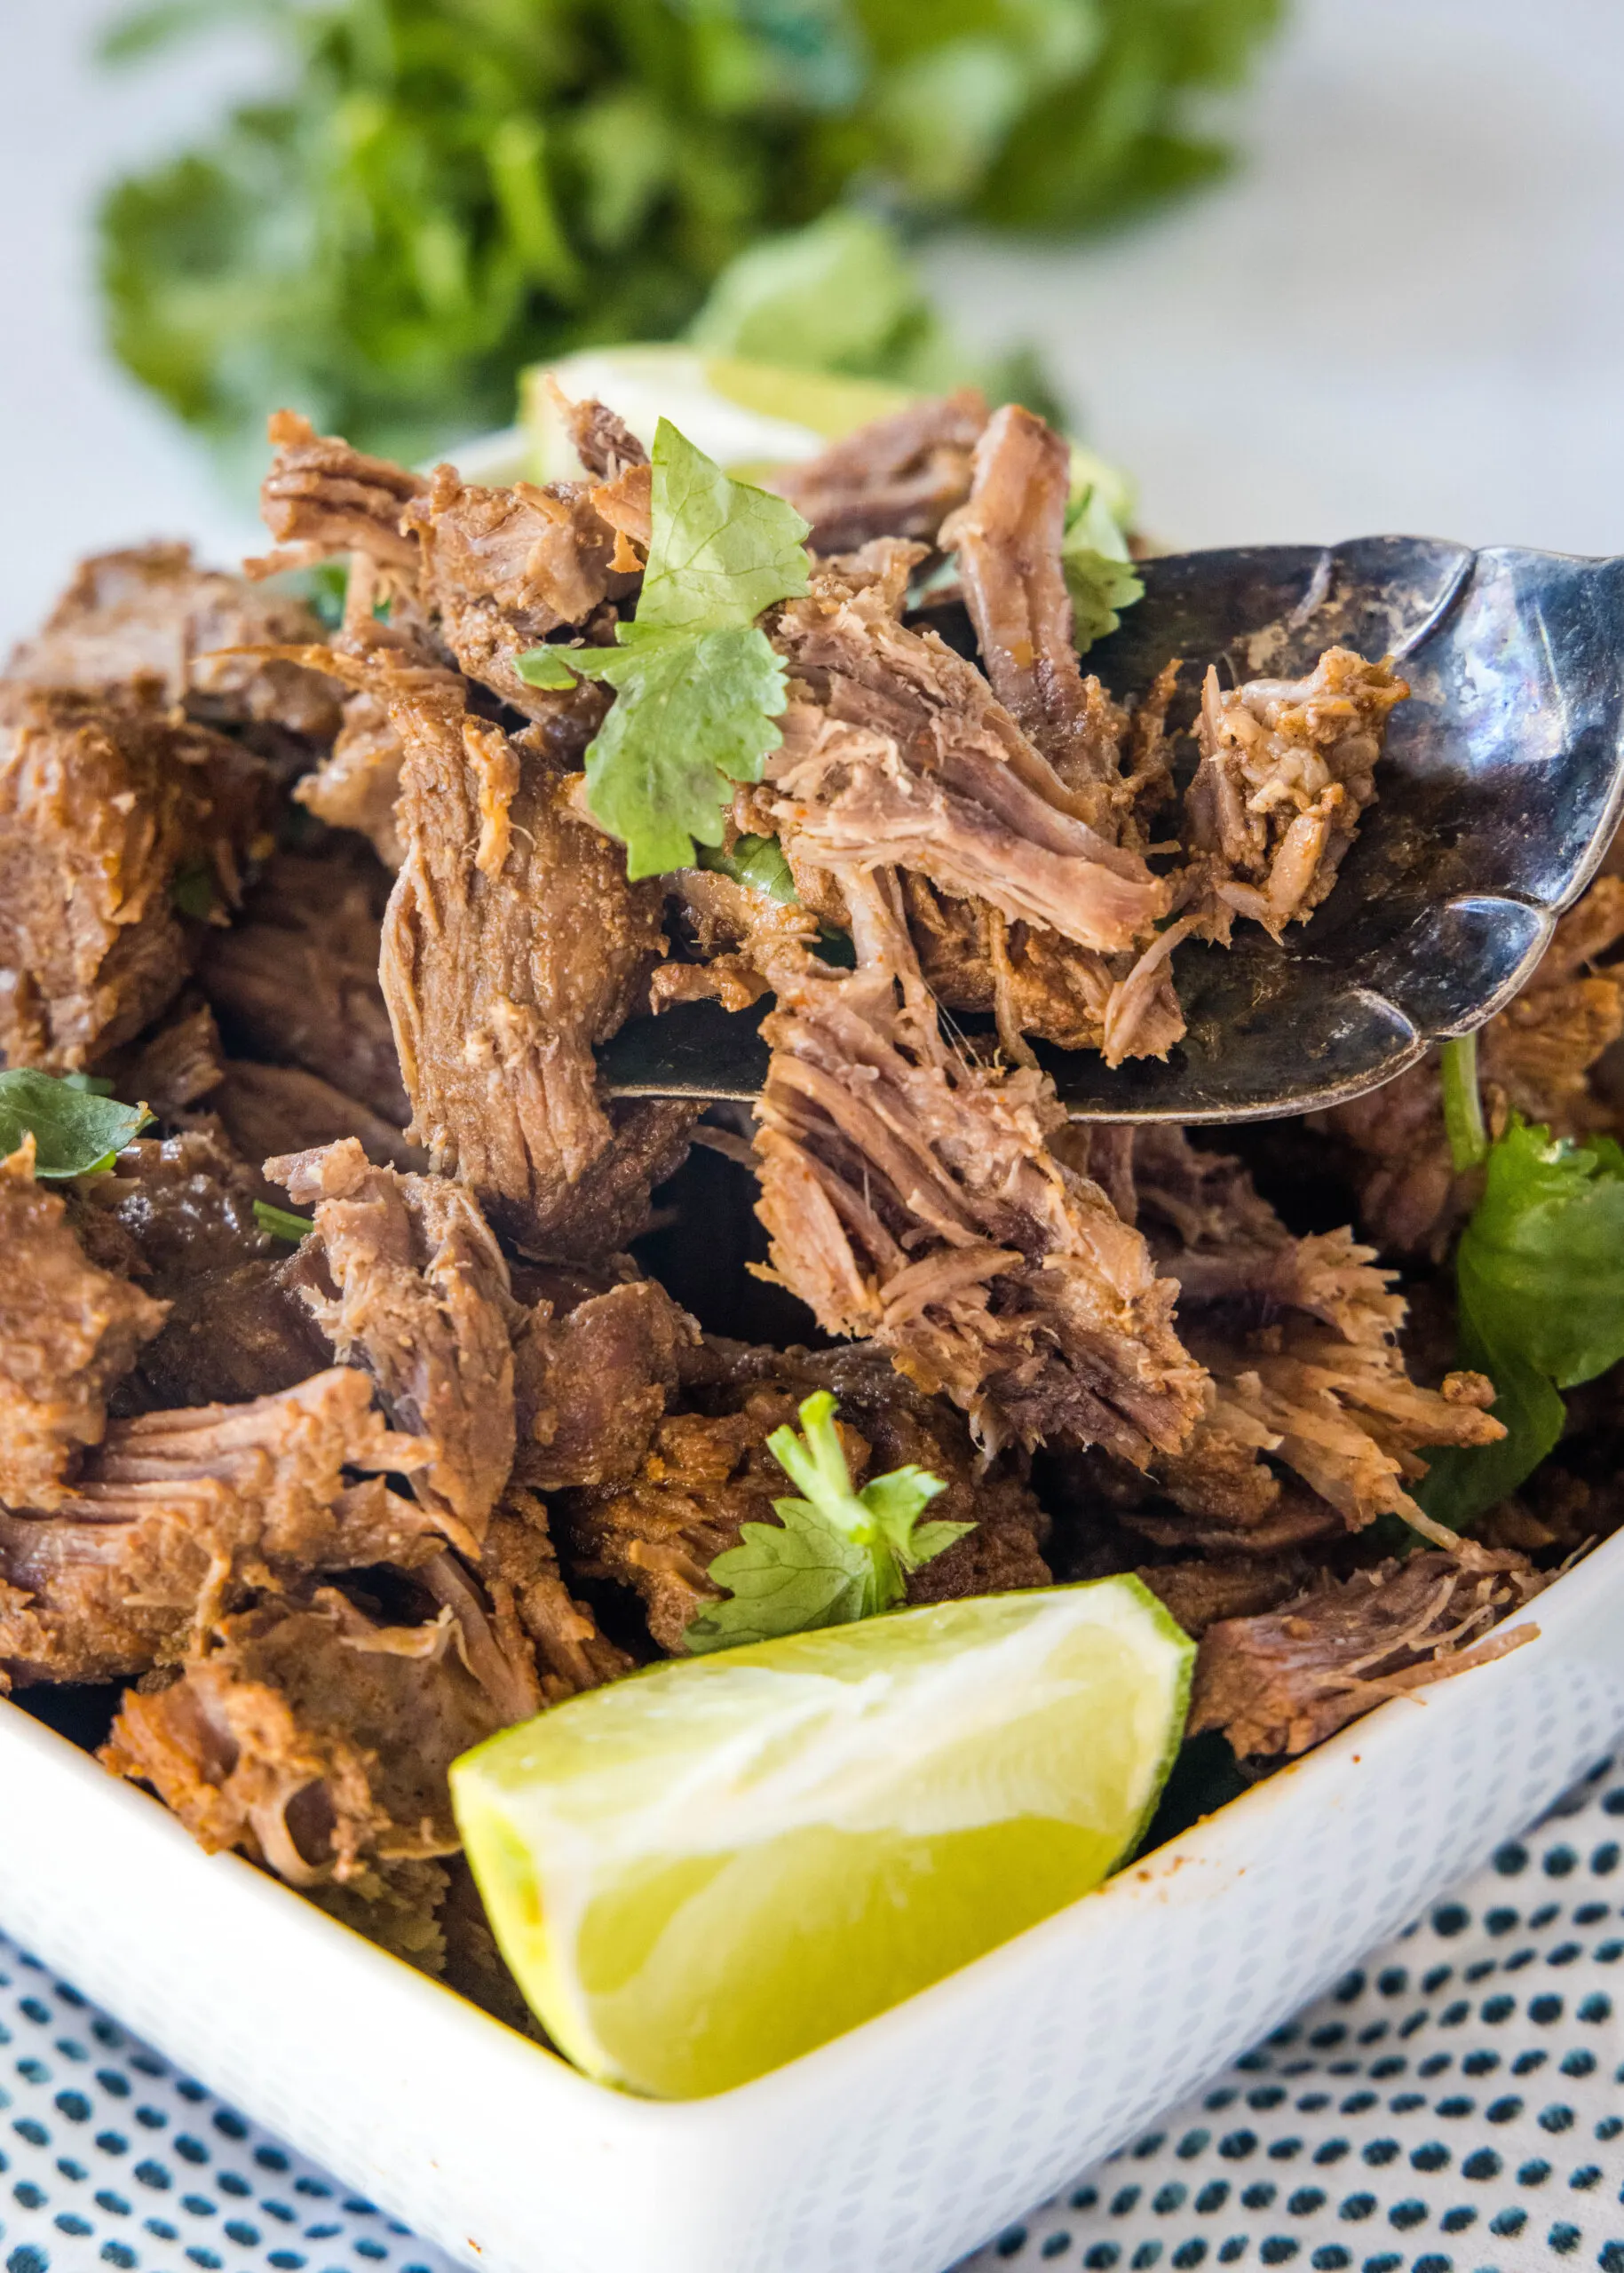 A serving spoon lifting Mexican shredded beef from a square bowl of beef garnished with cilantro and a lime wedge.